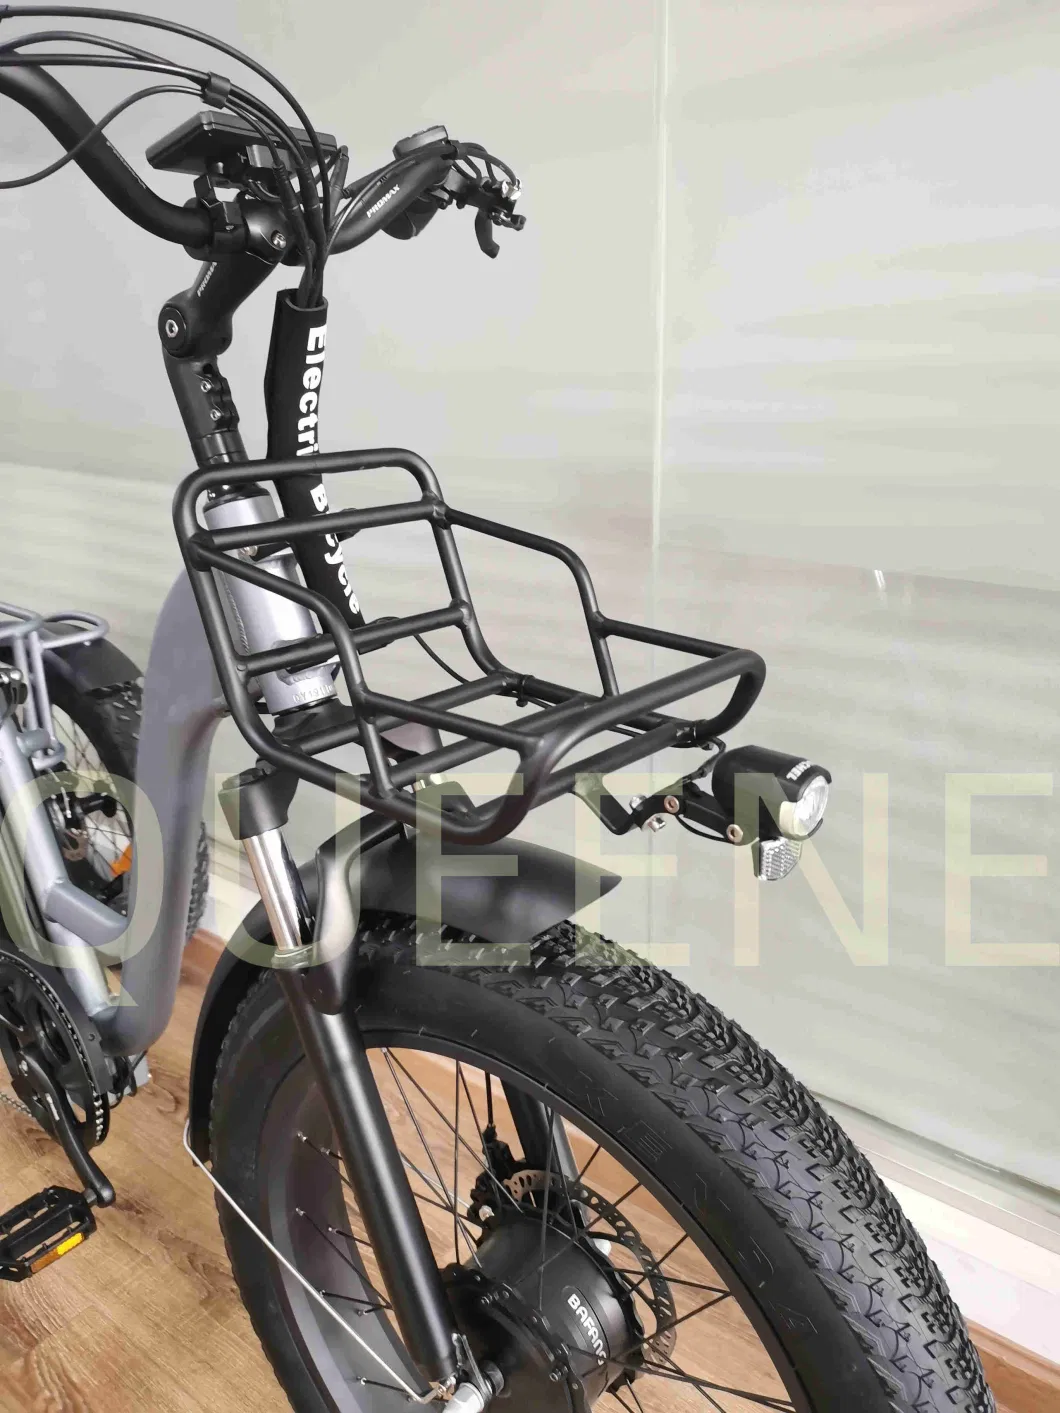 Queene New Release E Trike Aluminum Lithium Battery Disc Brakes 48V 500W 3 Wheels 24/20 Inch Fat Tire Electric Tricycle